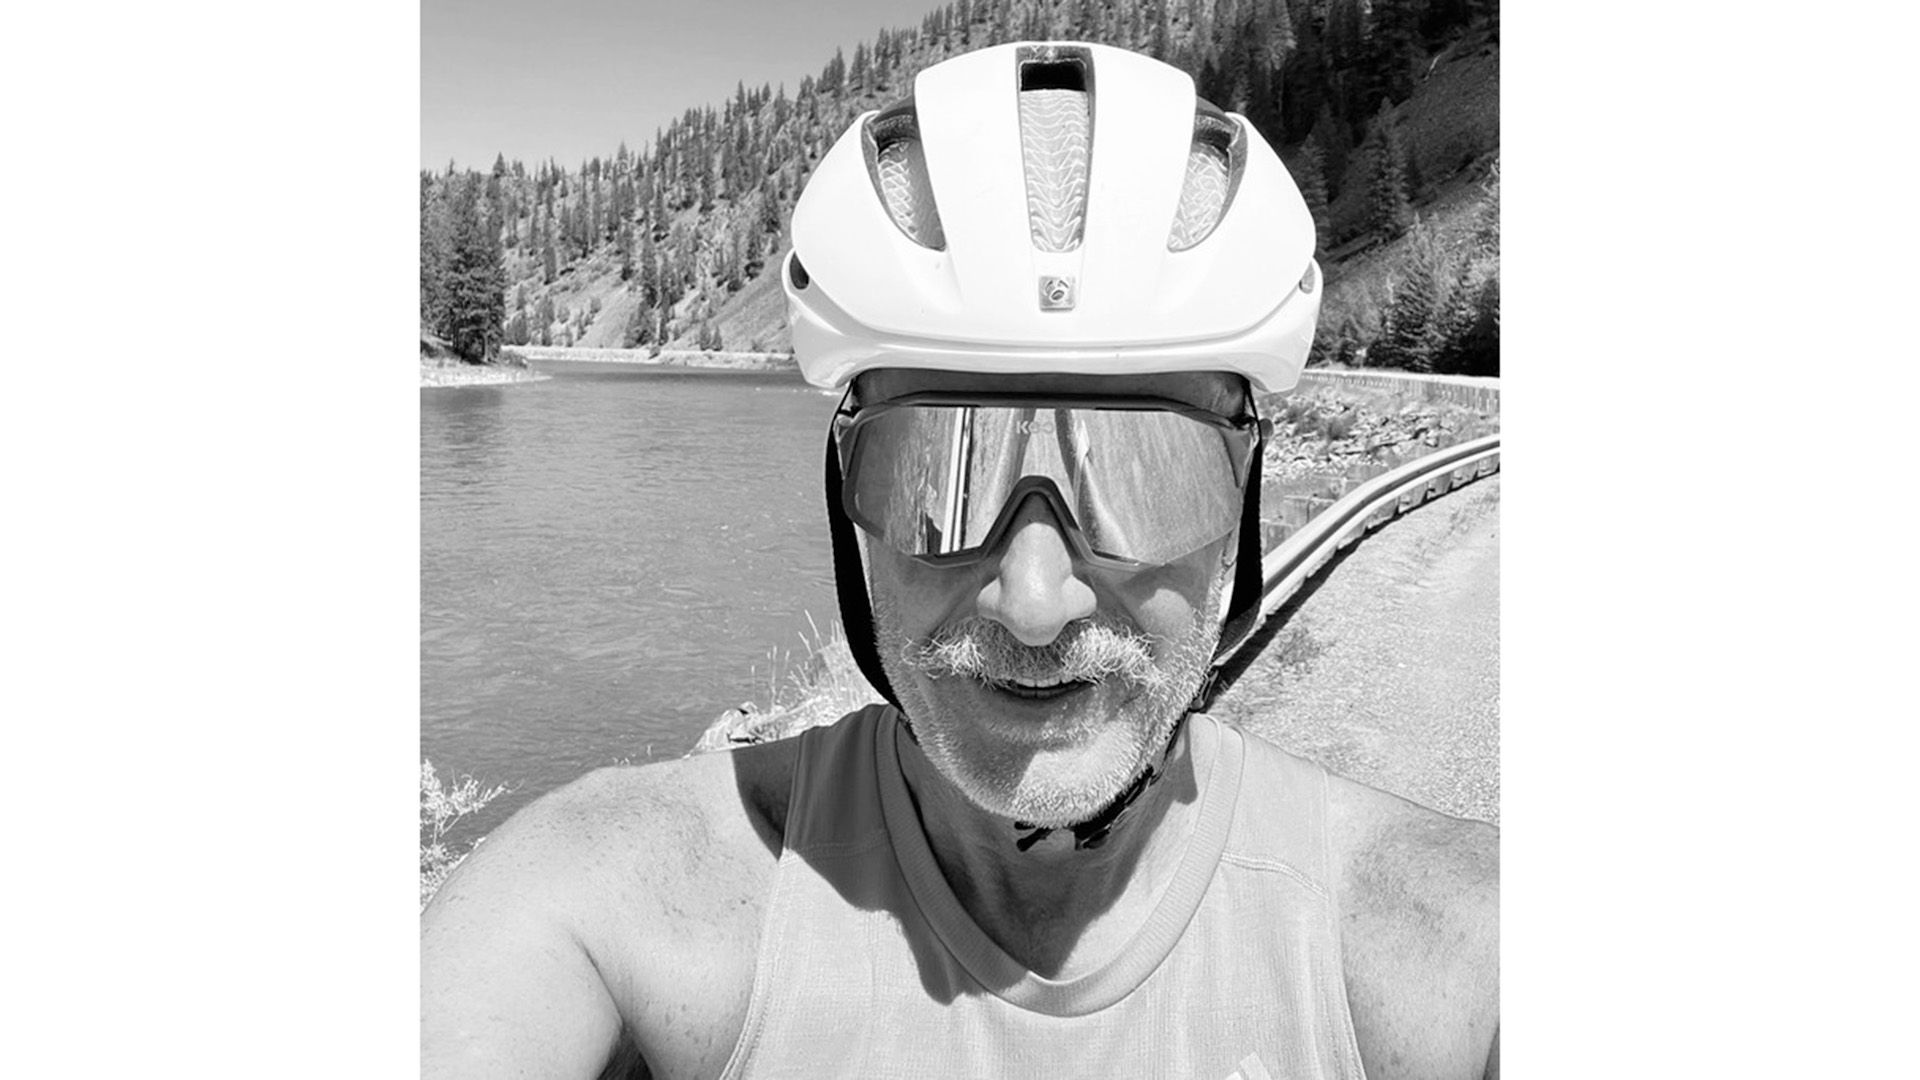 Portrait black and white photo of a man looking to camera, decked in full bike riding gear.